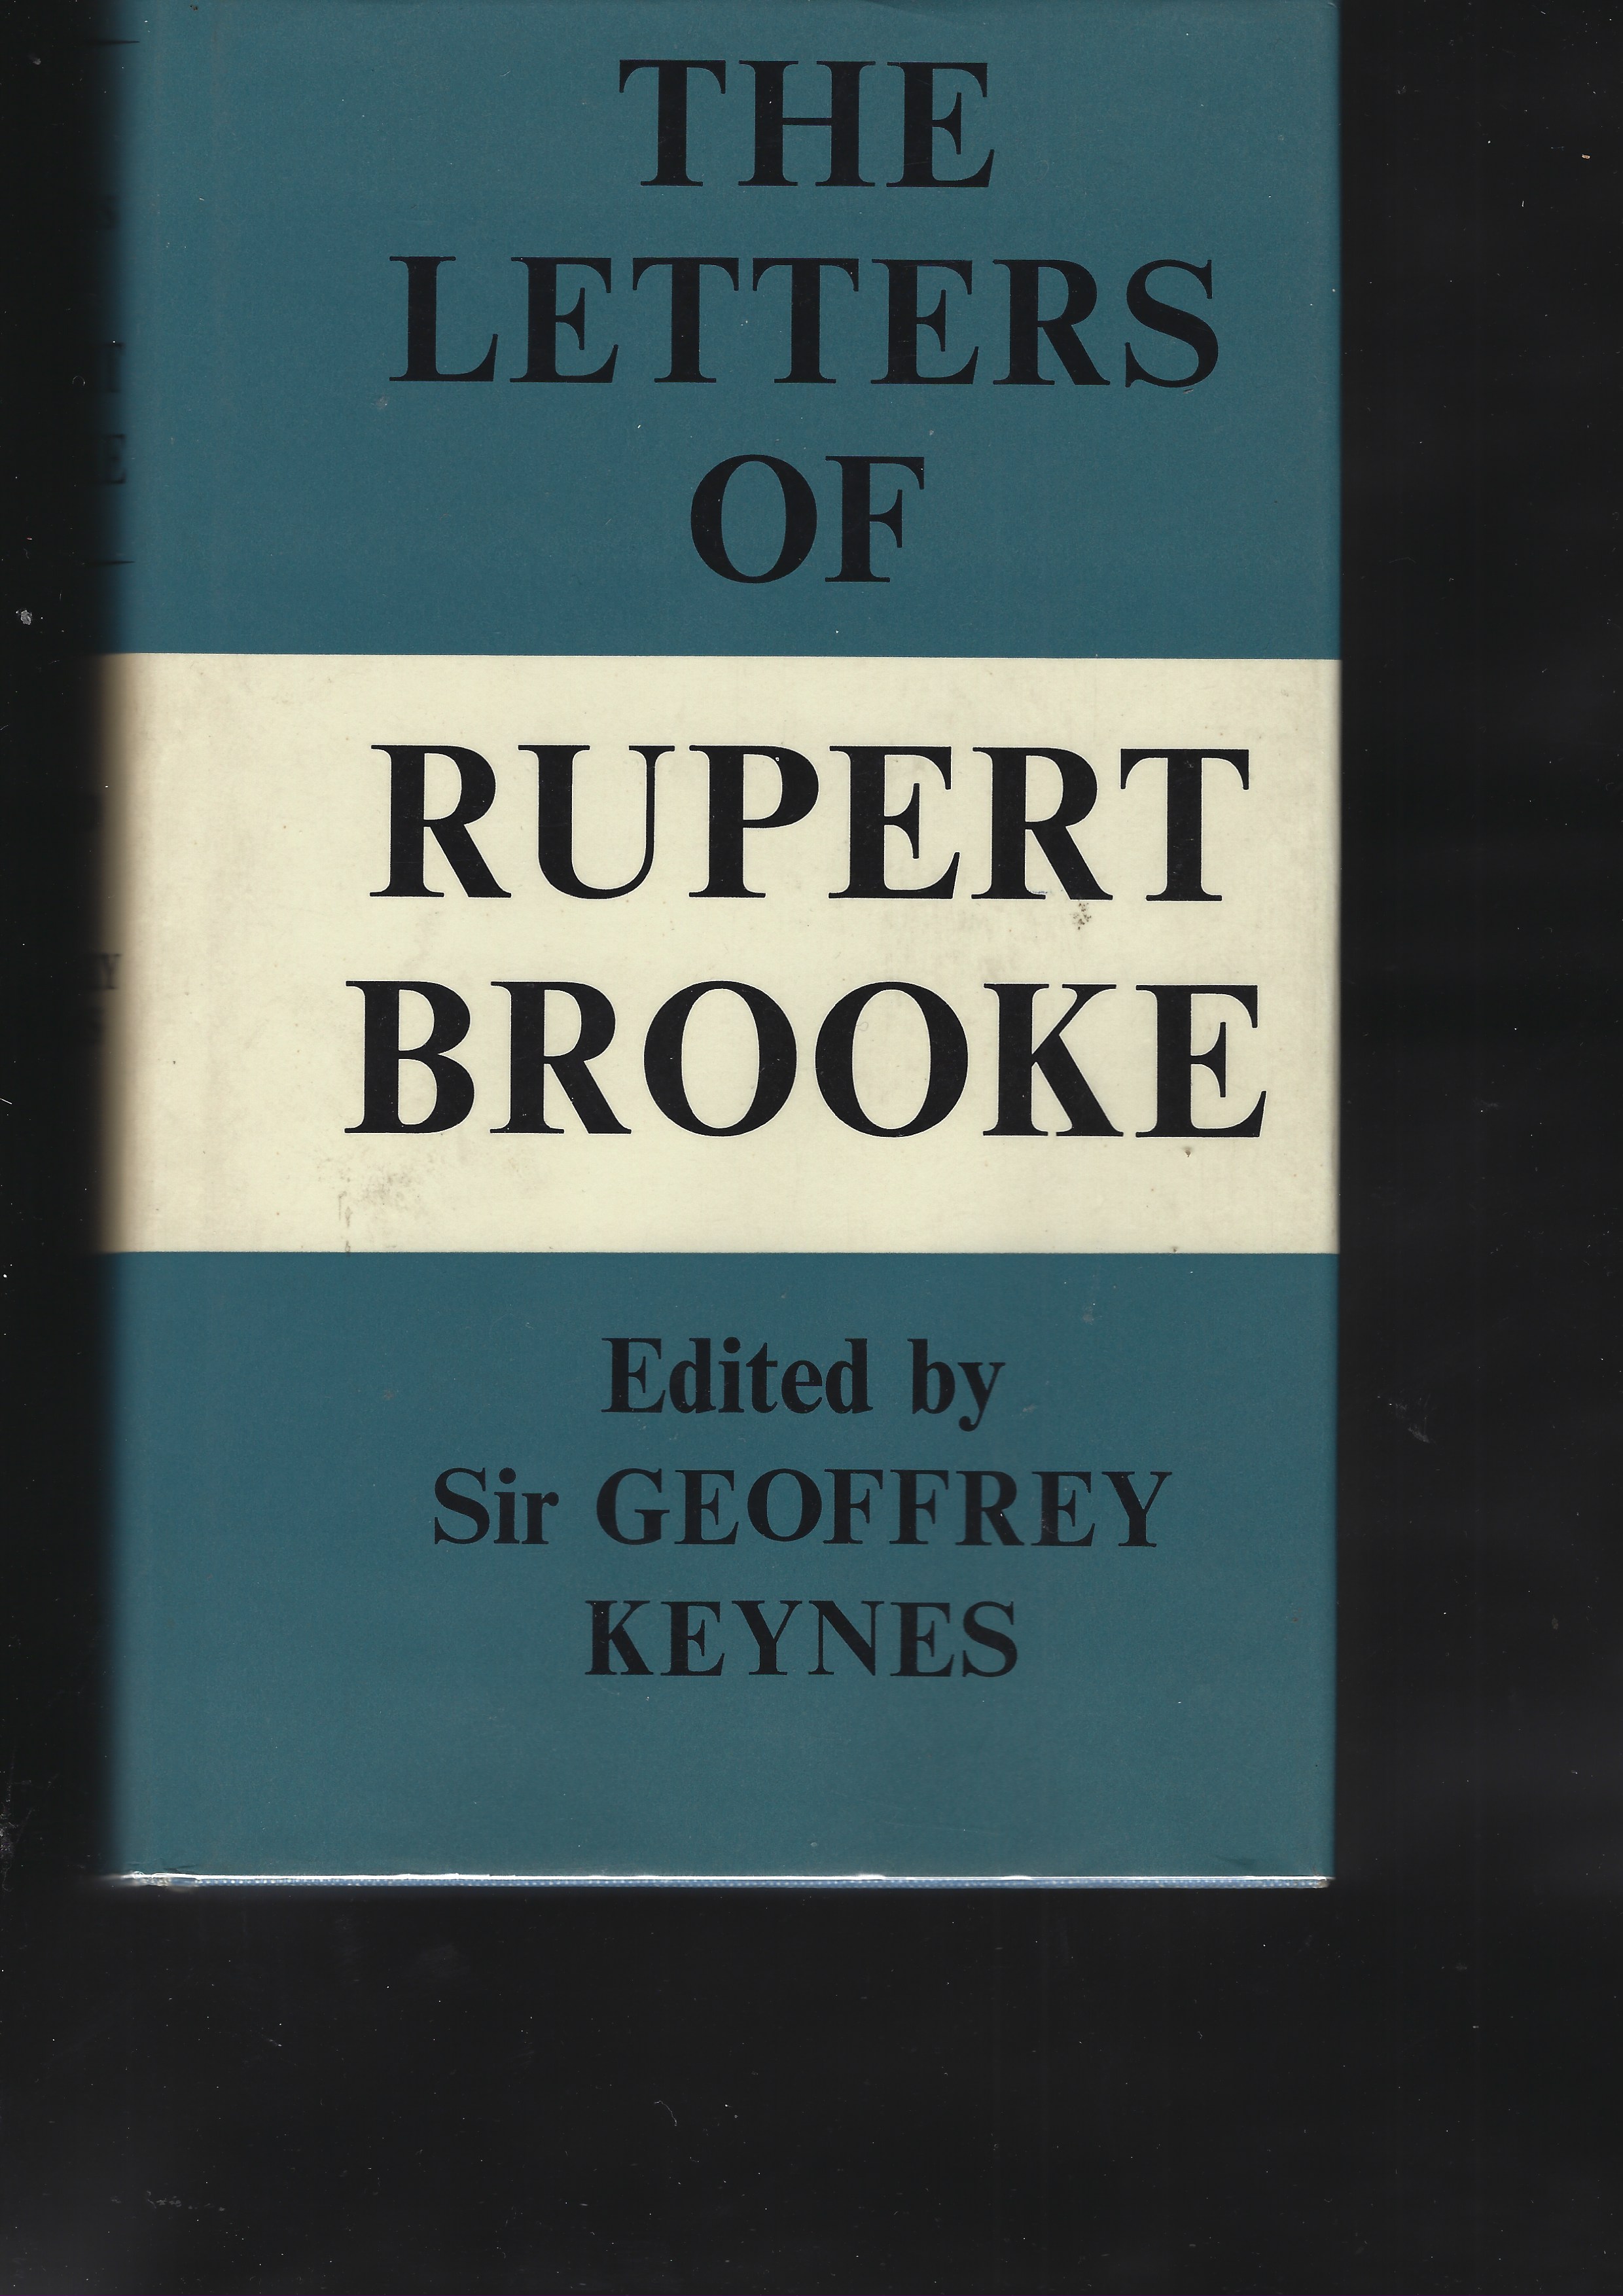 THE LETTERS OF RUPERT BROOKE by KEYNES, Sir Geoffrey (Editor) | Chaucer ...